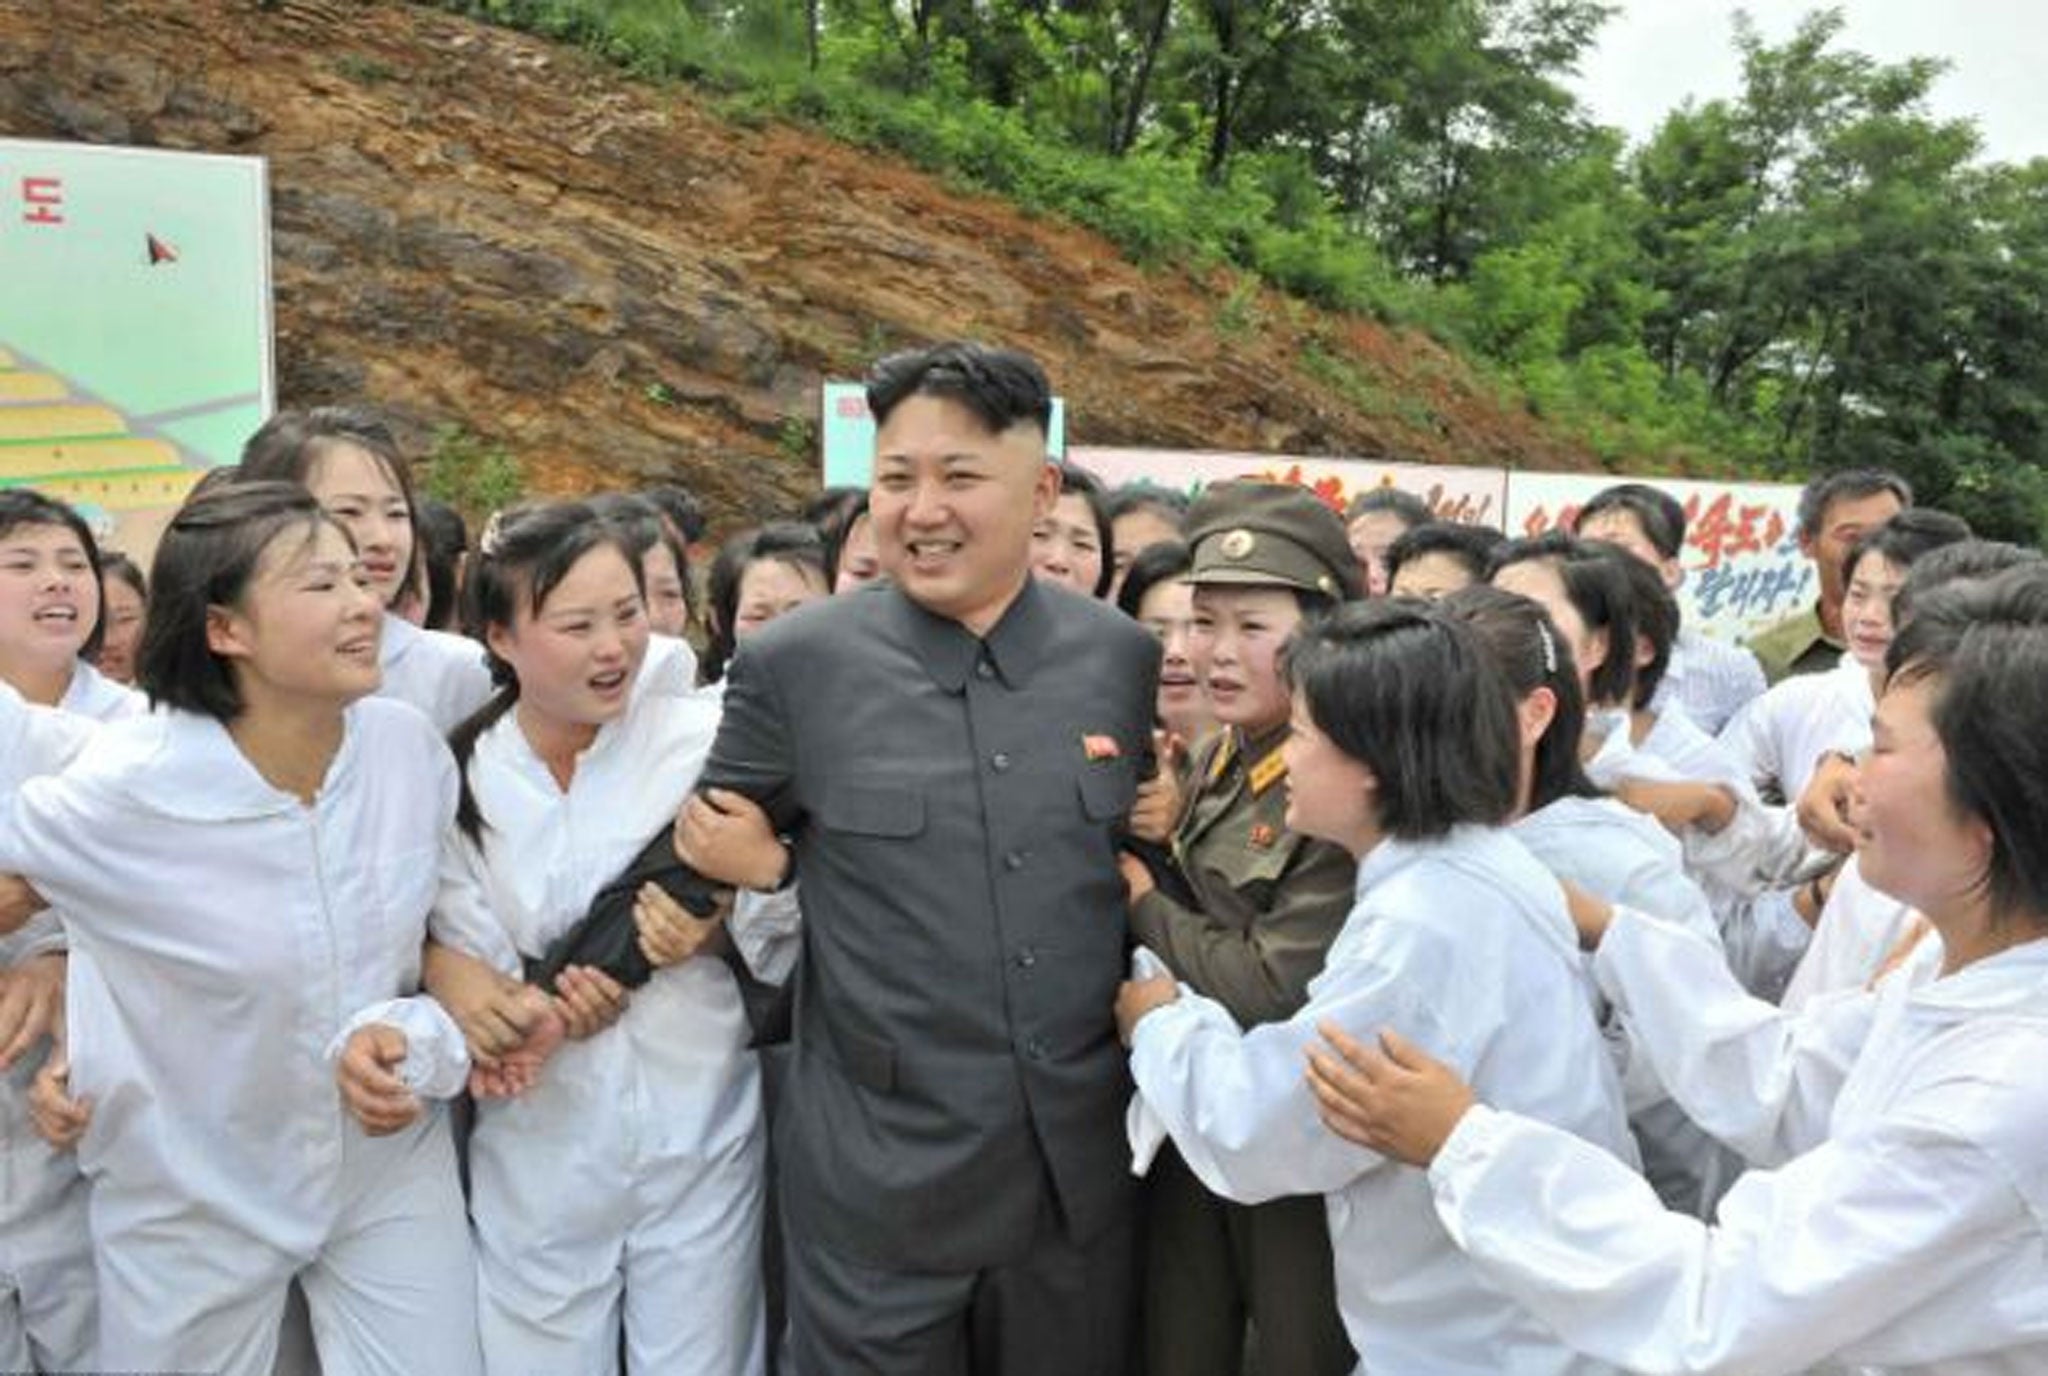 A smiling Kim Jong-un is seen being mobbed by a large group of crying women wearing white boiler suits